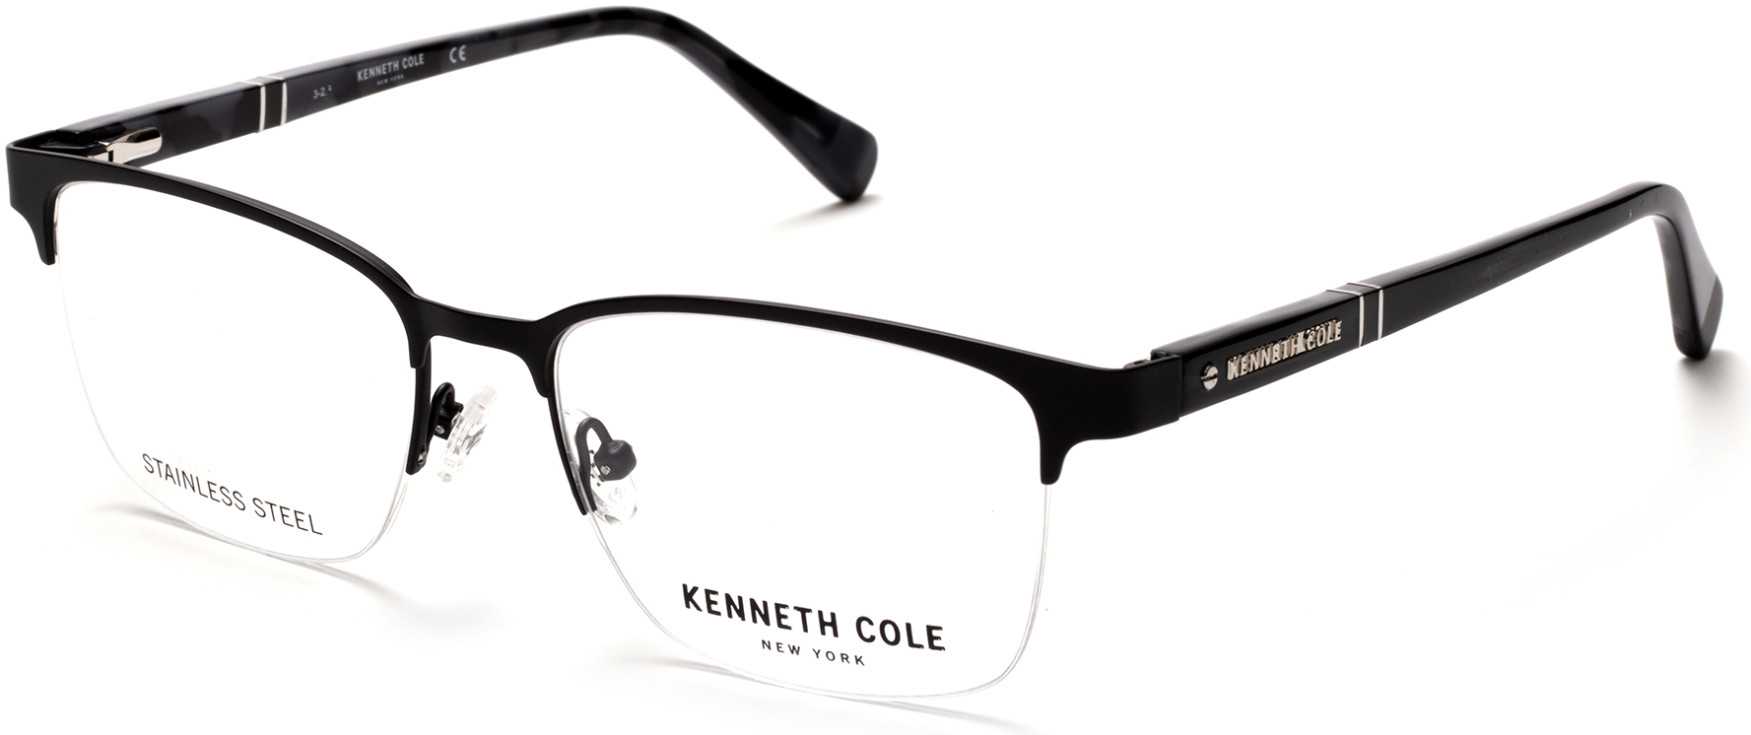 KENNETH COLE NY 0291 002